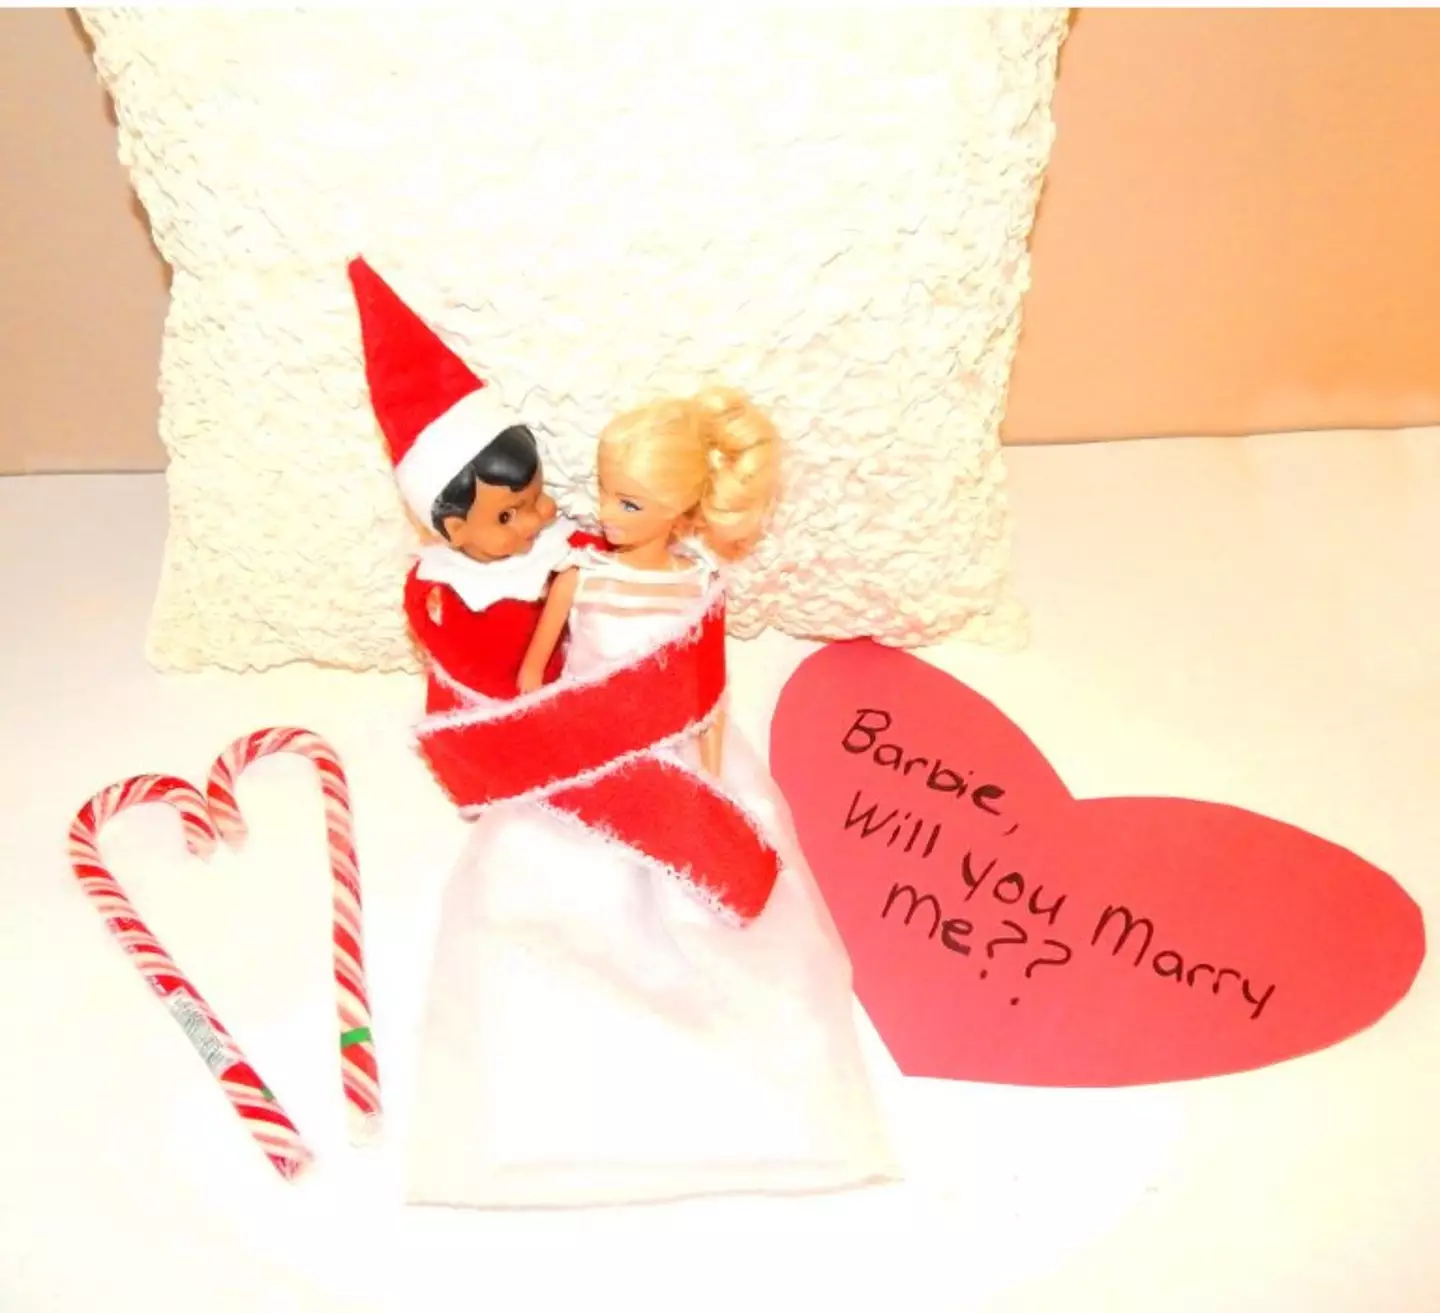 Elf and Barbie get engaged. (